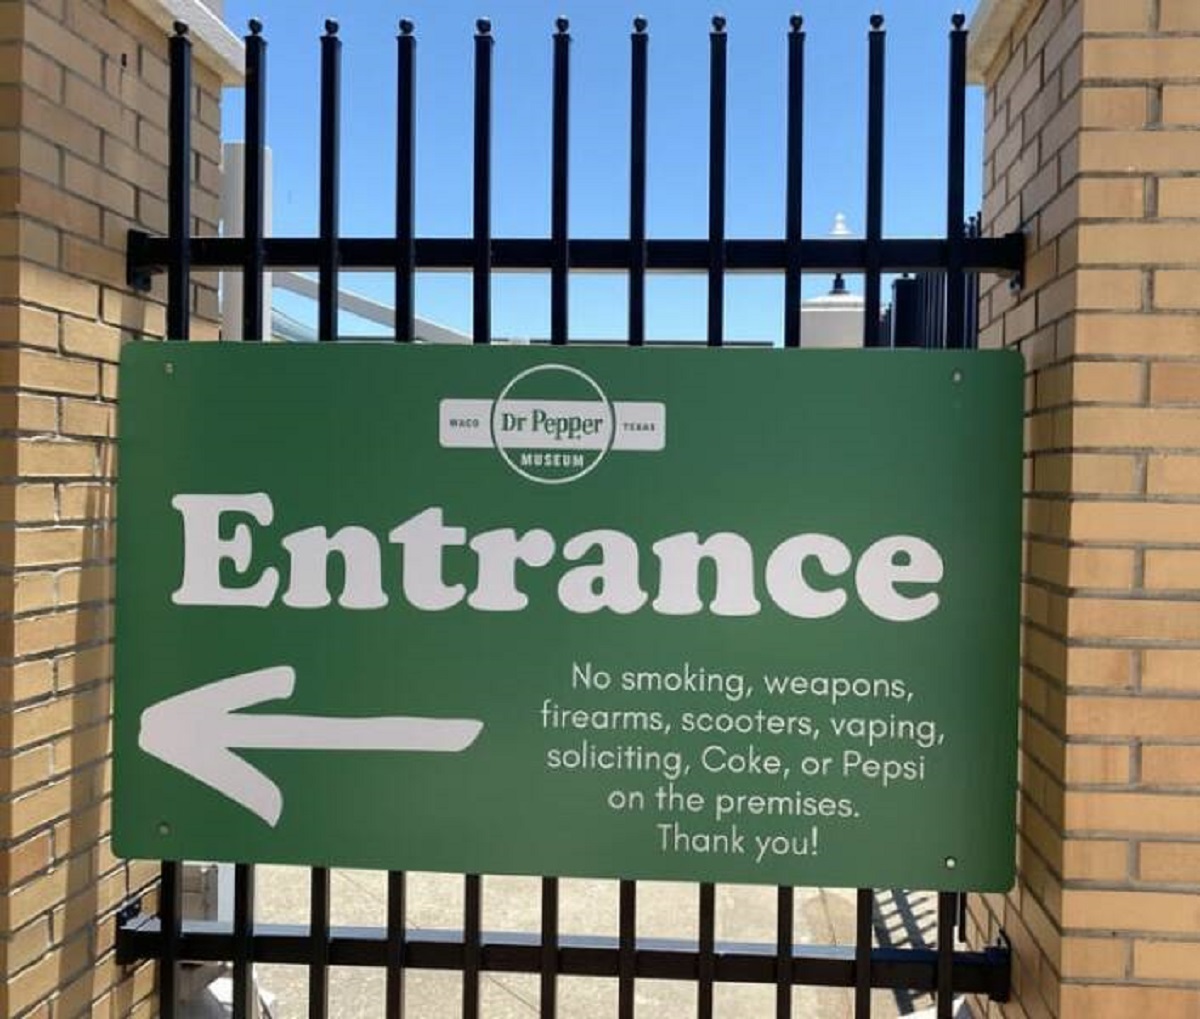 "The Dr Pepper Museum in Waco, TX does not allow any Coke or Pepsi products on the premises"